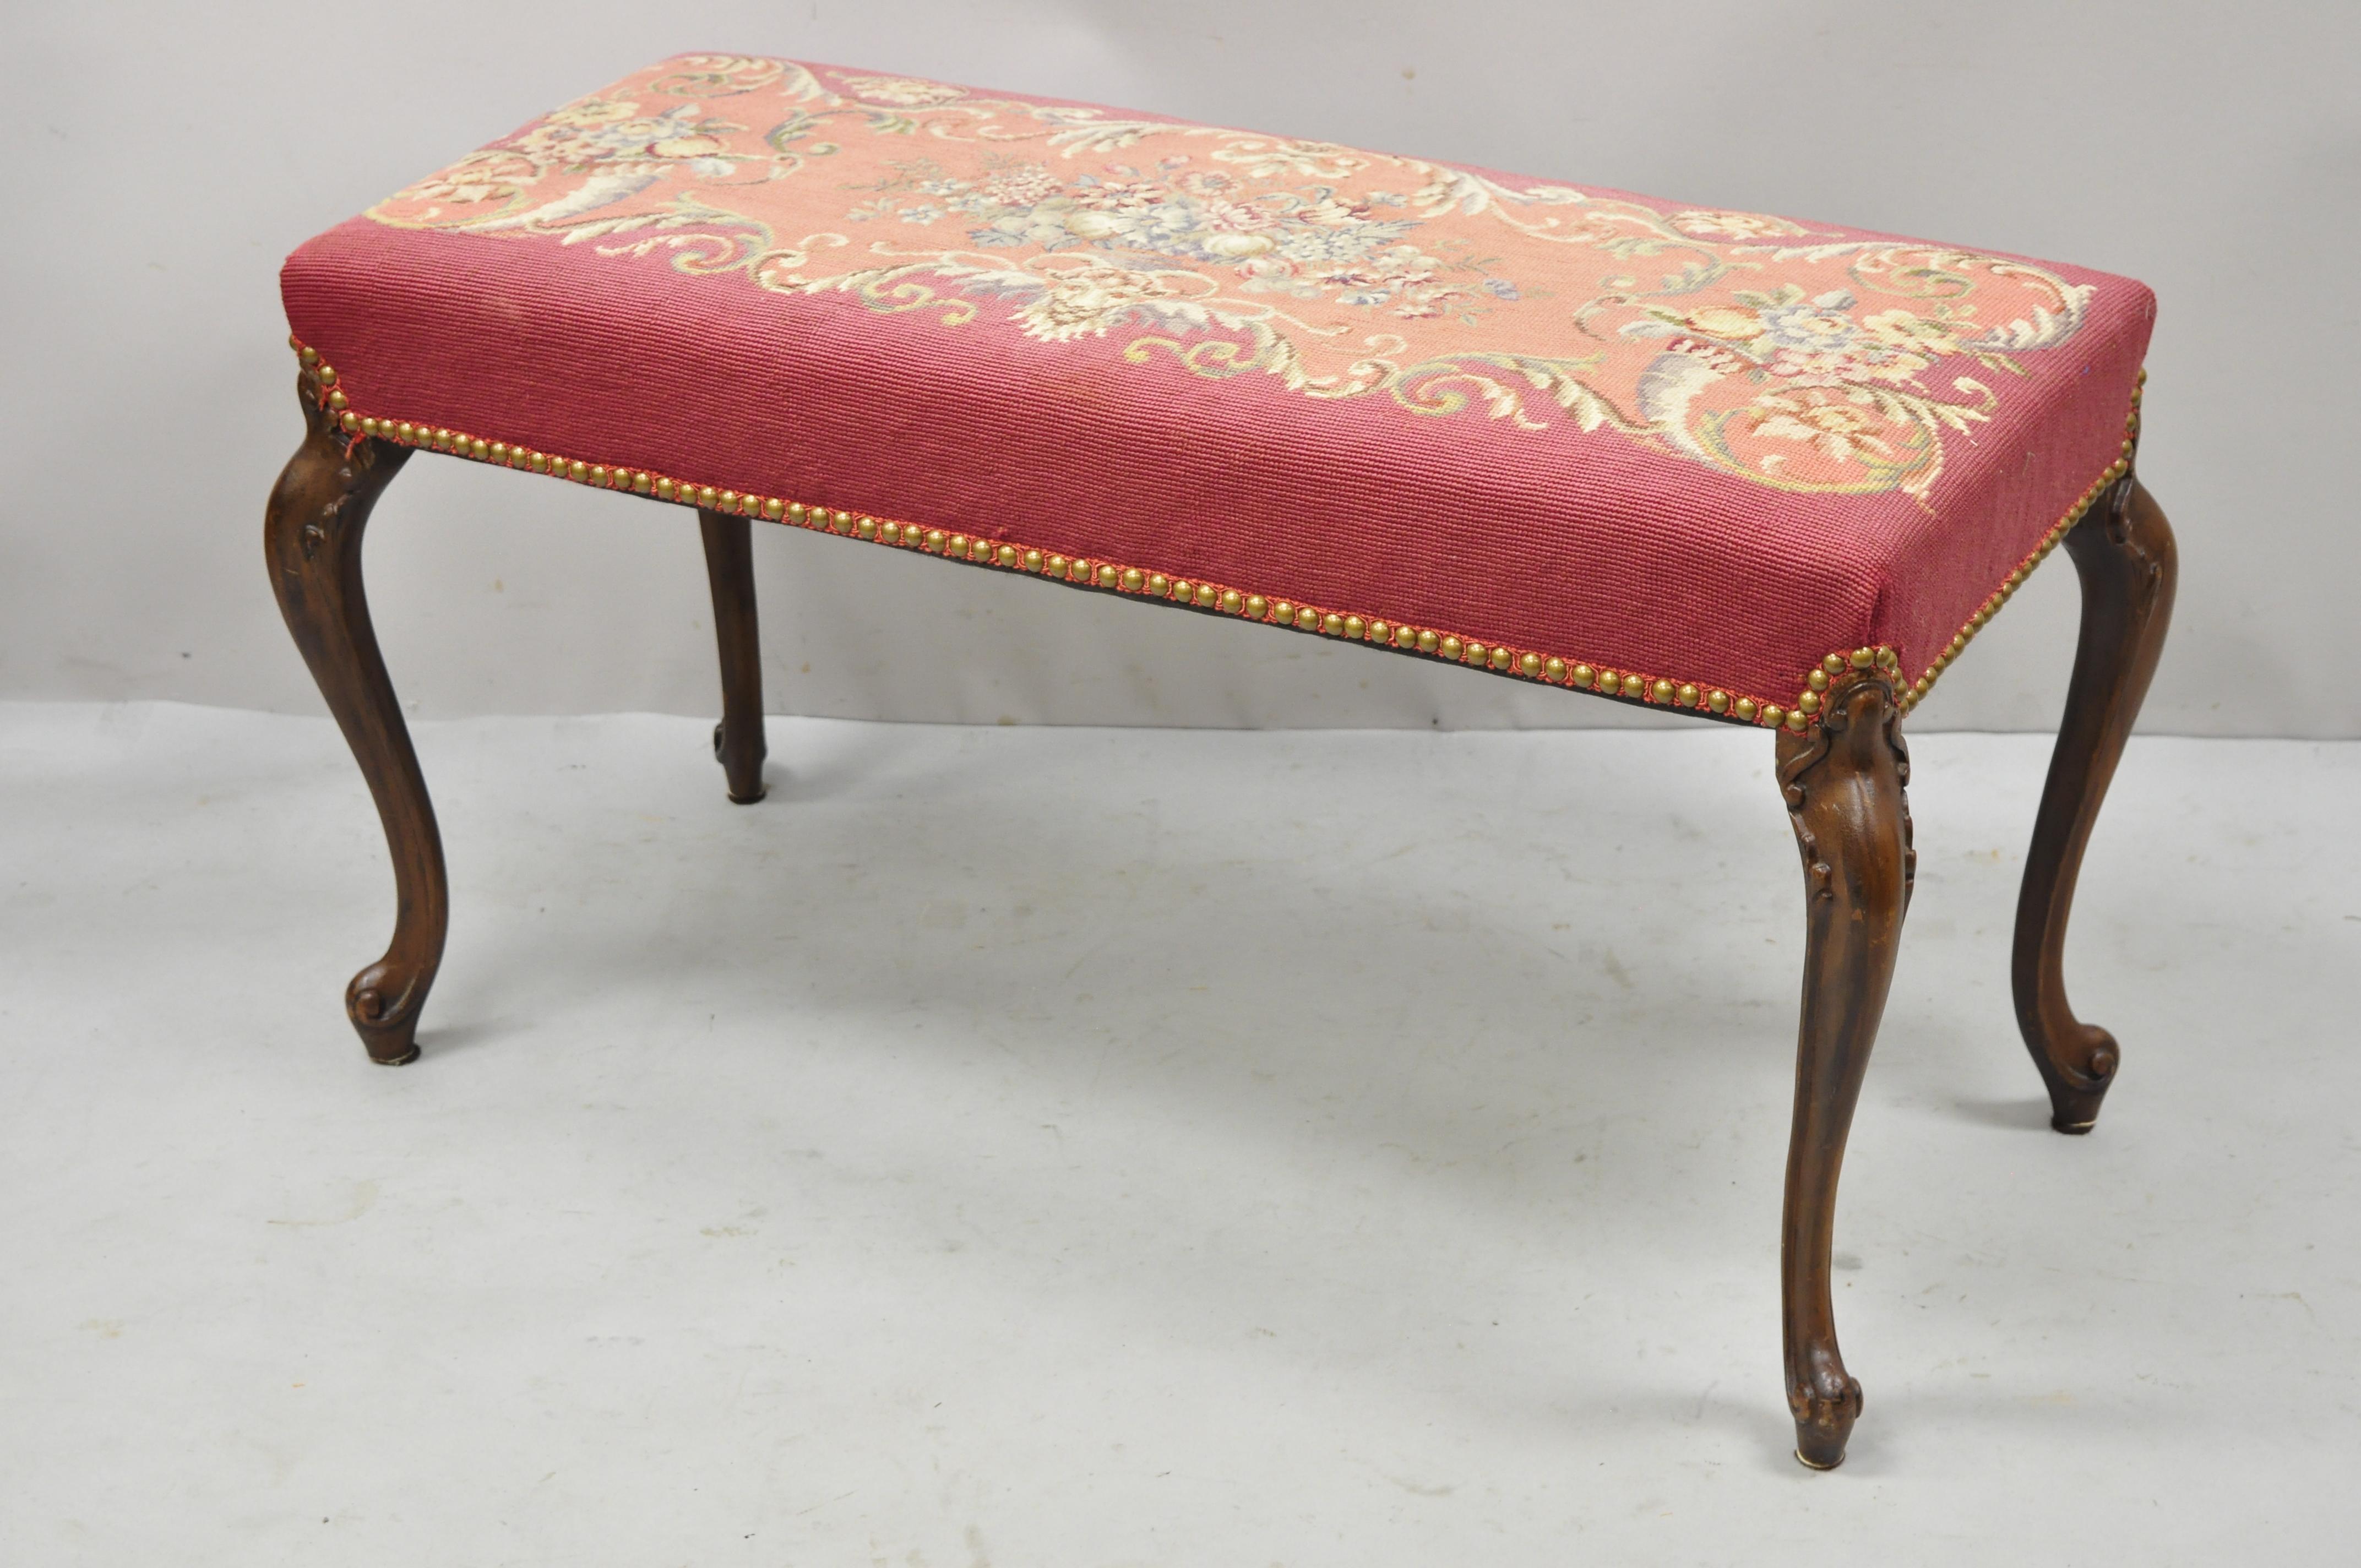 North American Antique French Victorian Pink Floral Needlepoint Mahogany Cabriole Leg Bench